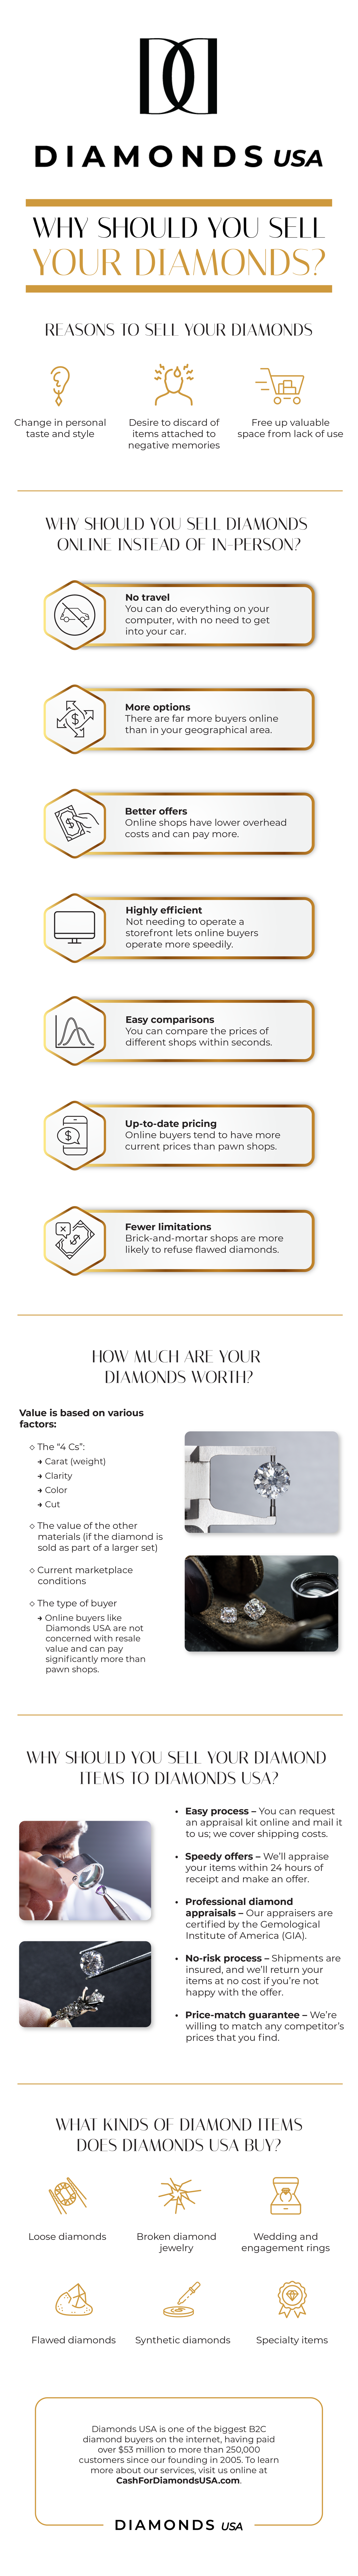 Considerations When Selling Diamonds Infographic